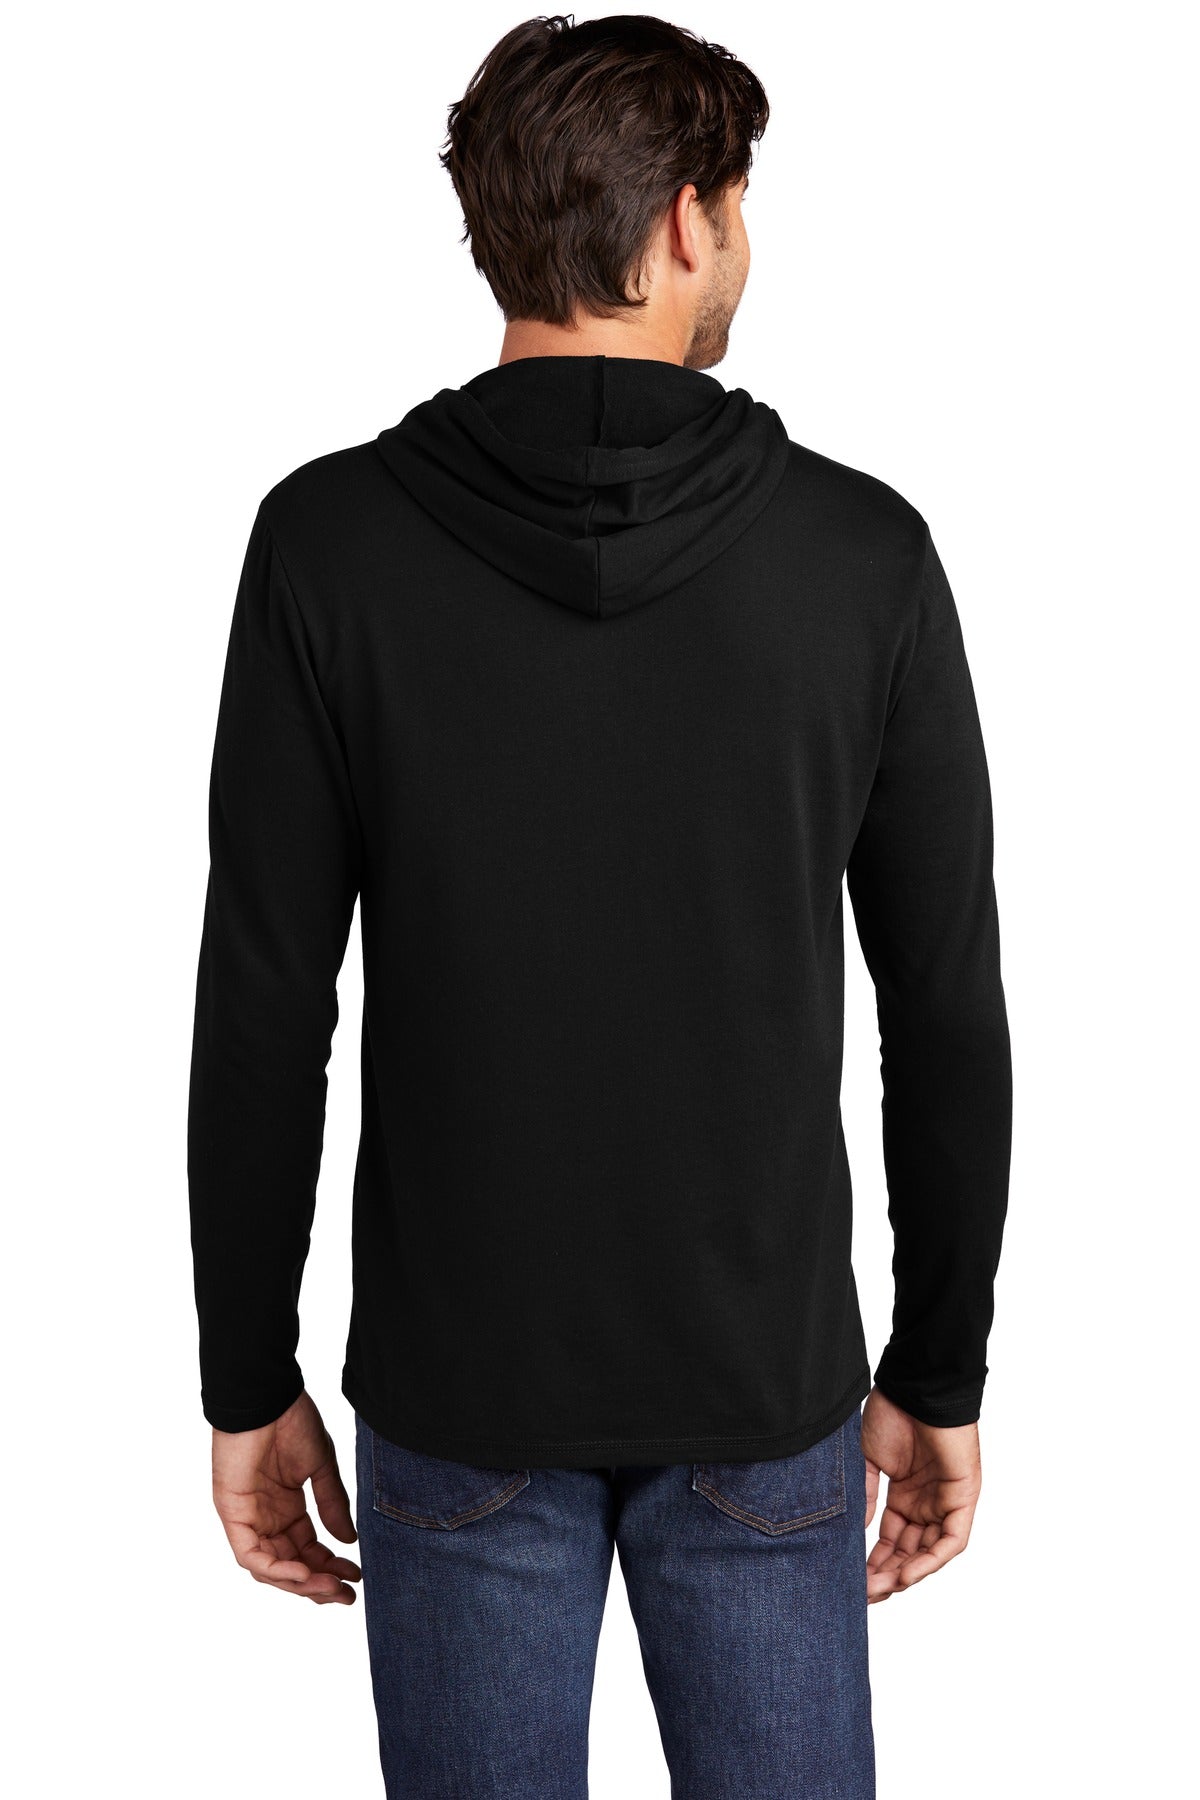 District ® Featherweight French Terry ™ Hoodie DT571 - DFW Impression